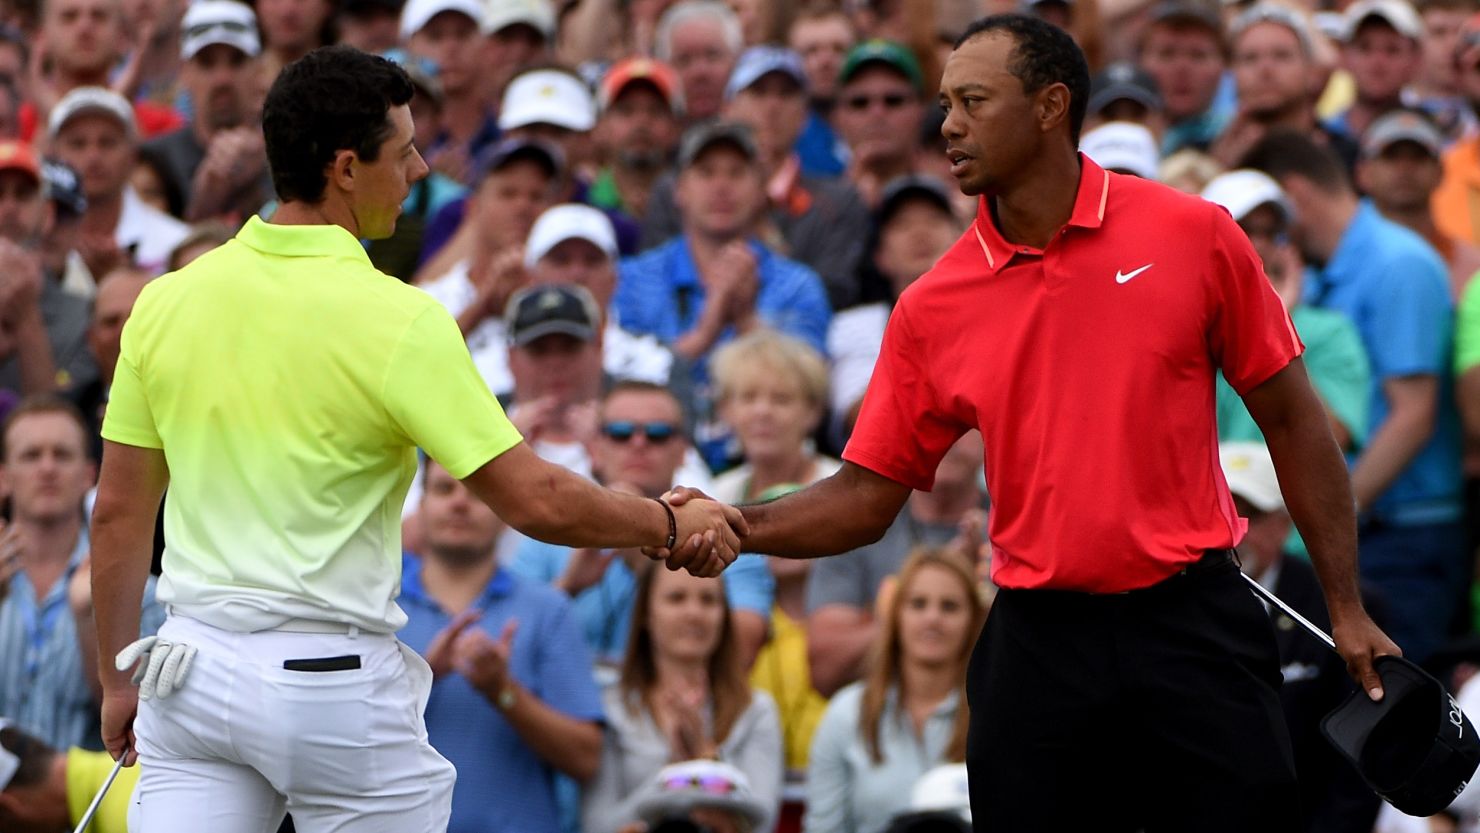 As the Open Championship nears, Rory McIlroy (left) and Tiger Woods are struggling with fitness and form respectively.